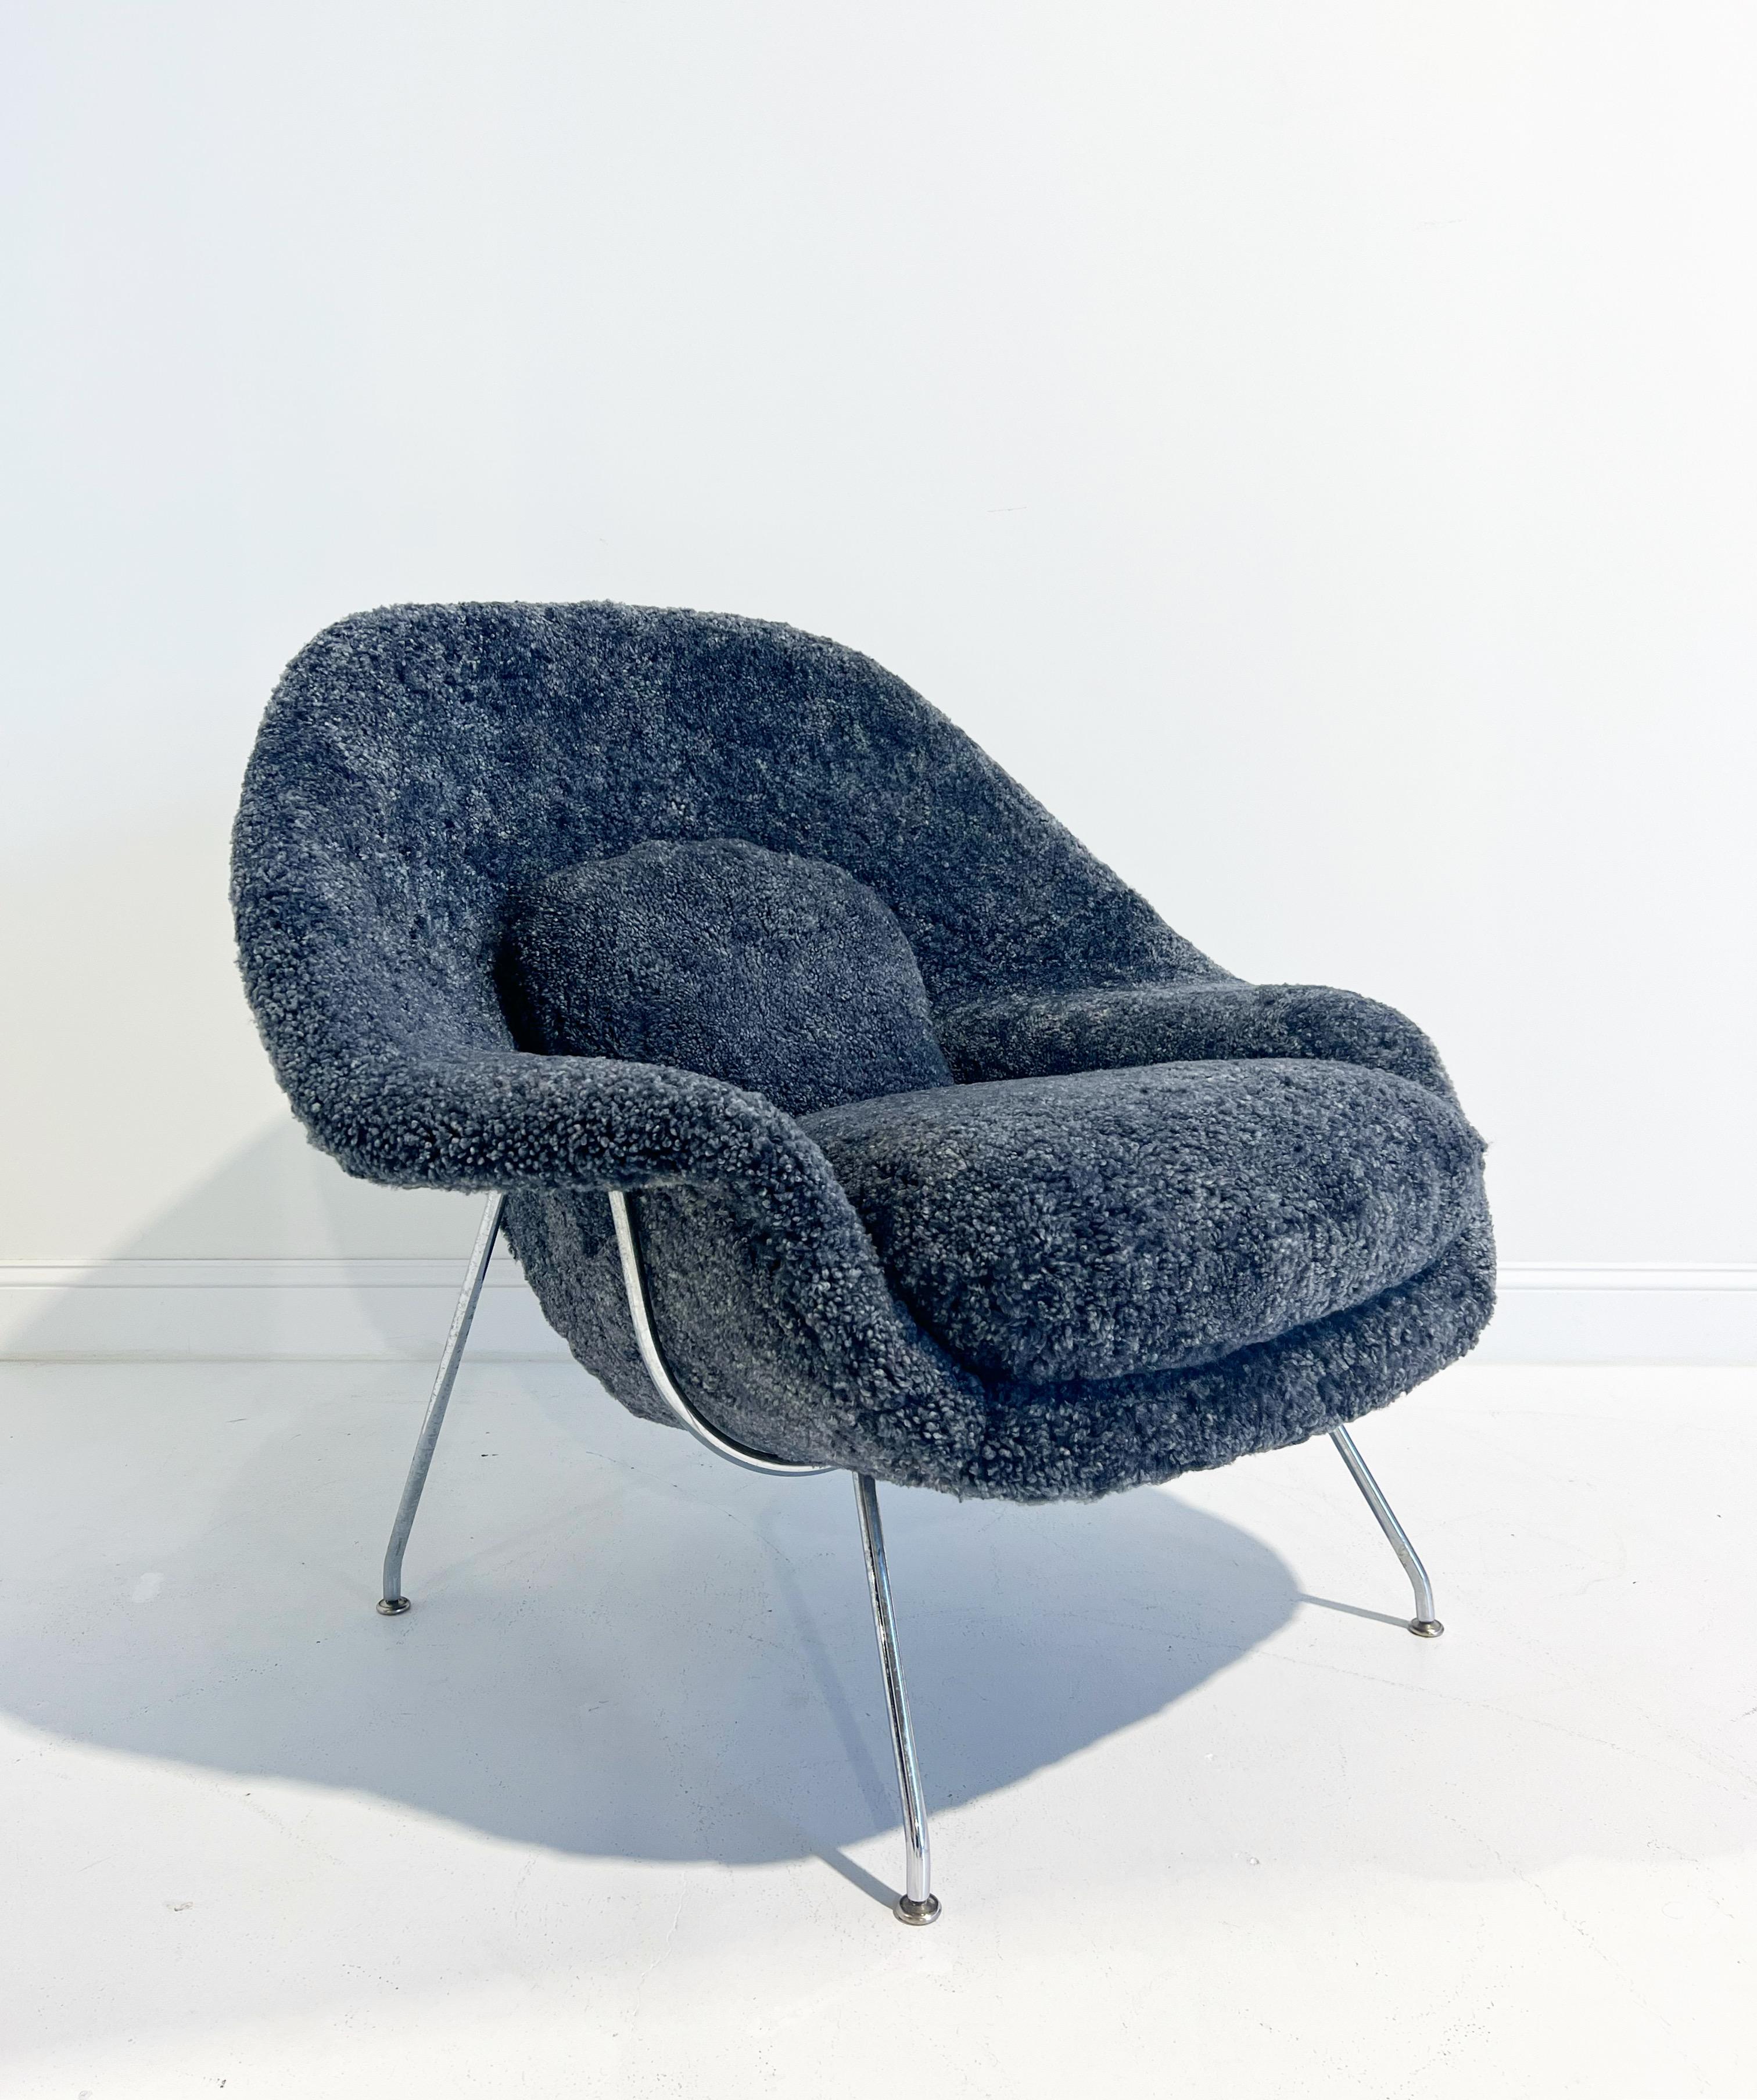 Forsyth Bespoke Eero Saarinen Womb Chair and Ottoman in Shearling For Sale 1